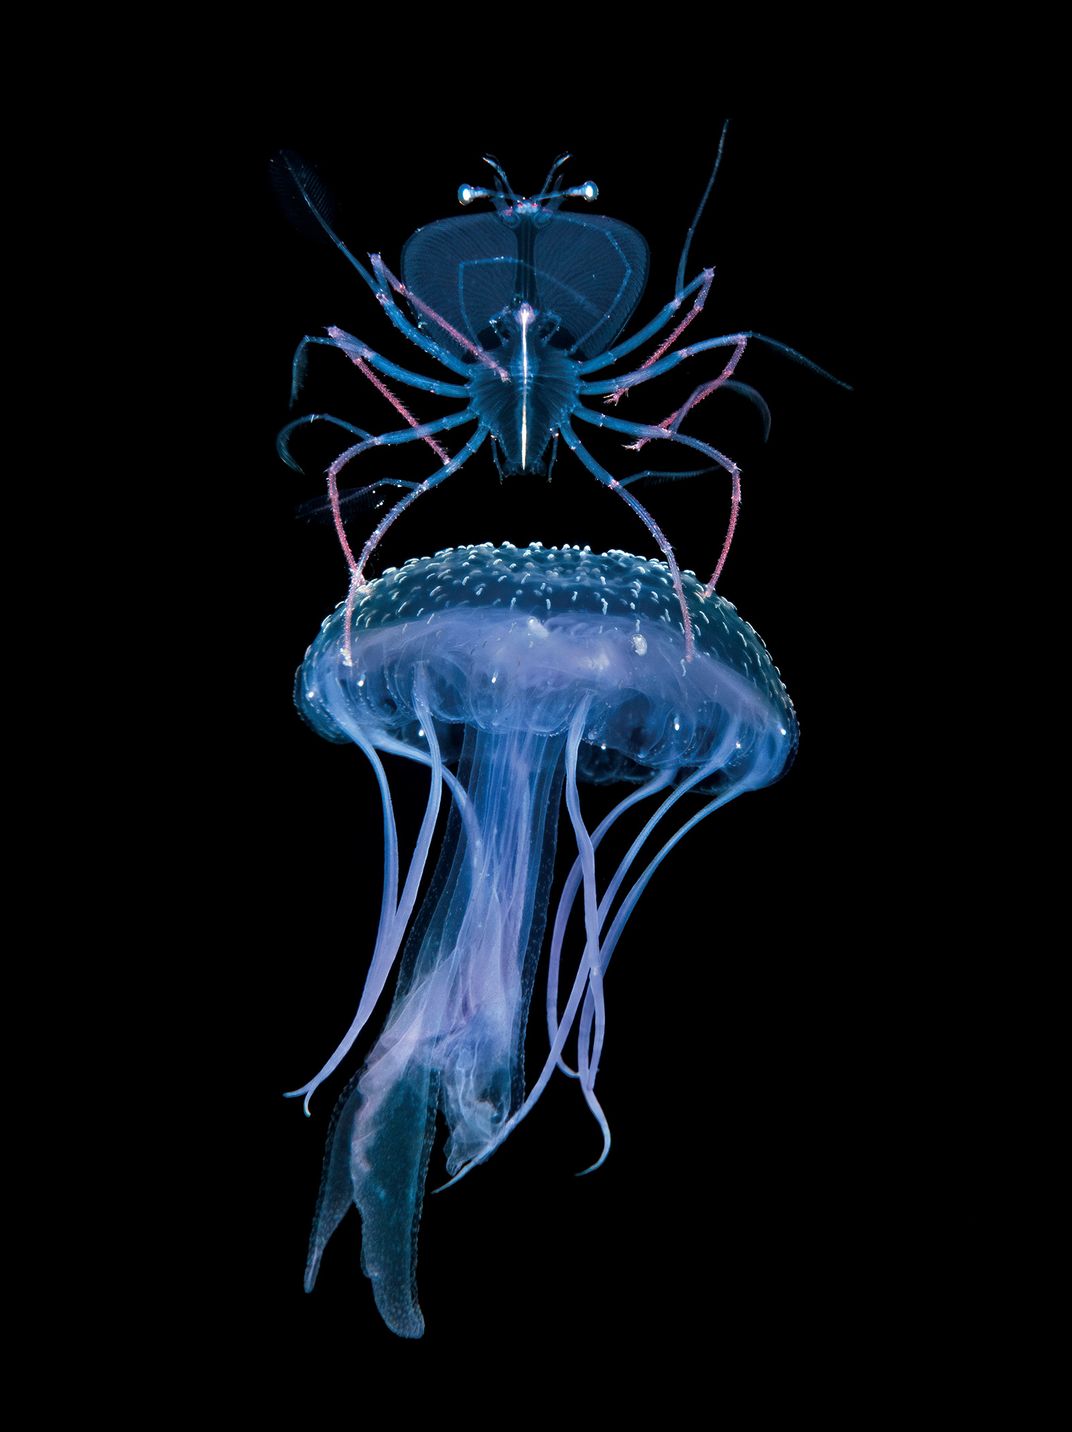 Larval Lobster Riding a Jellyfish